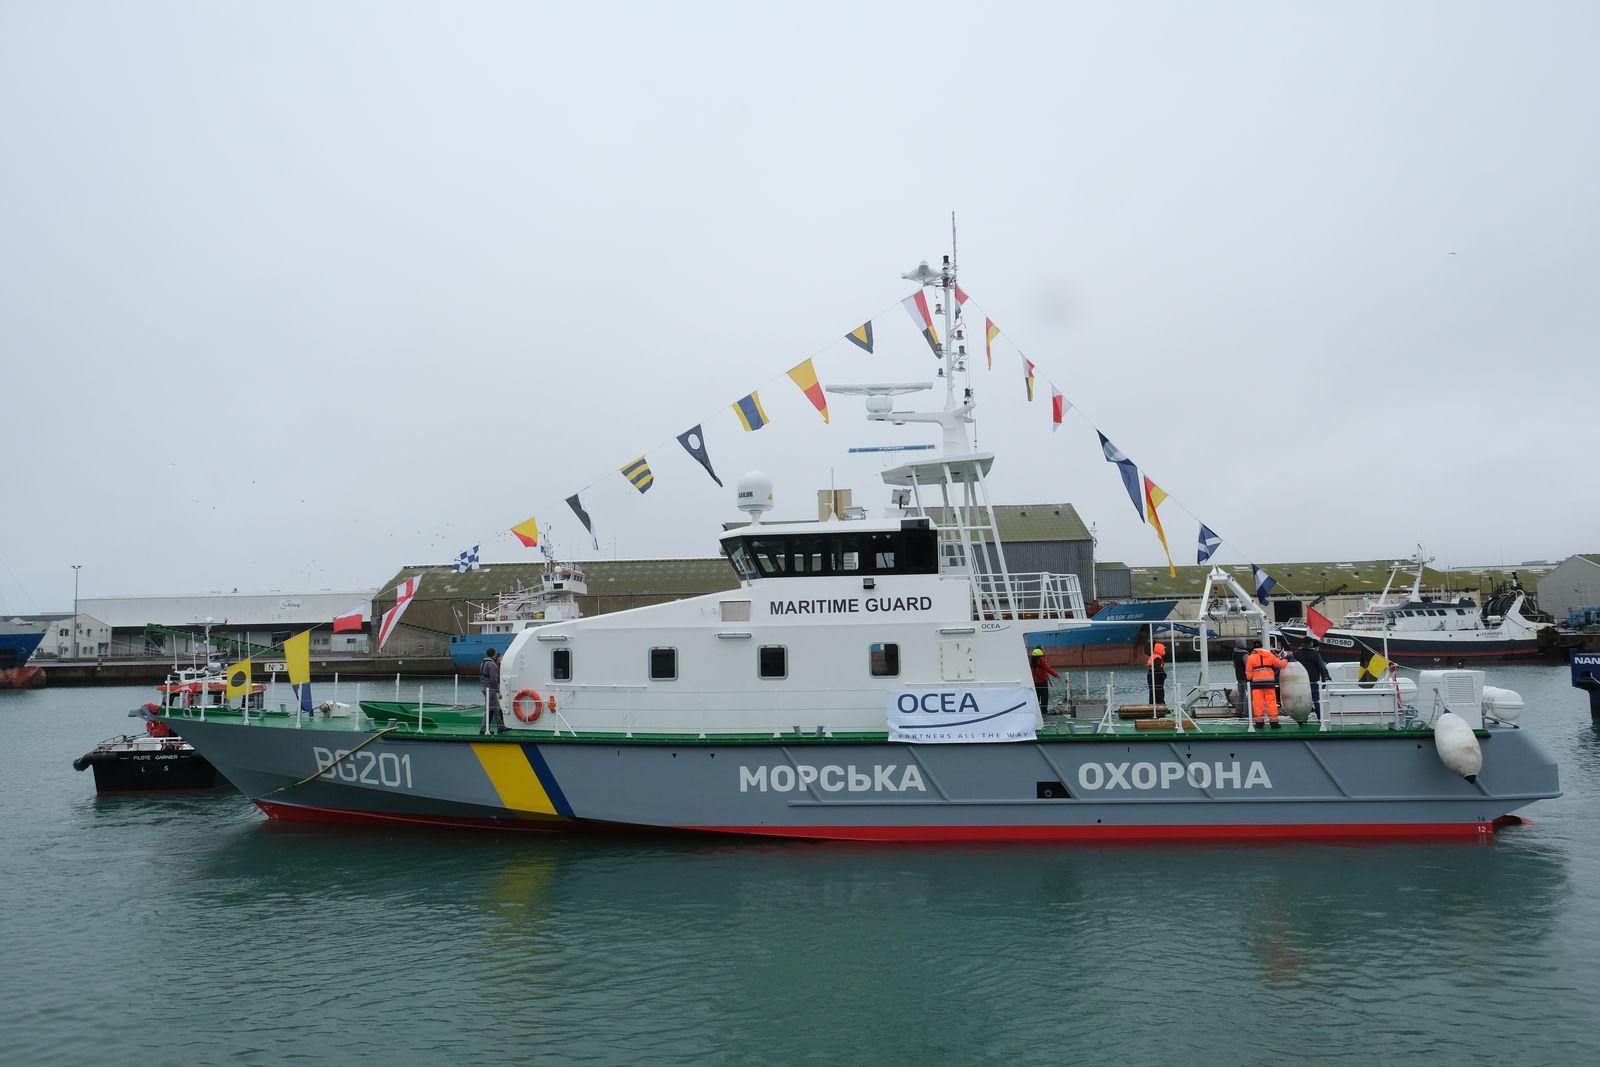 French Shipyard OCEA Launches First Patrol Boat for Ukraine State Border Guard Service